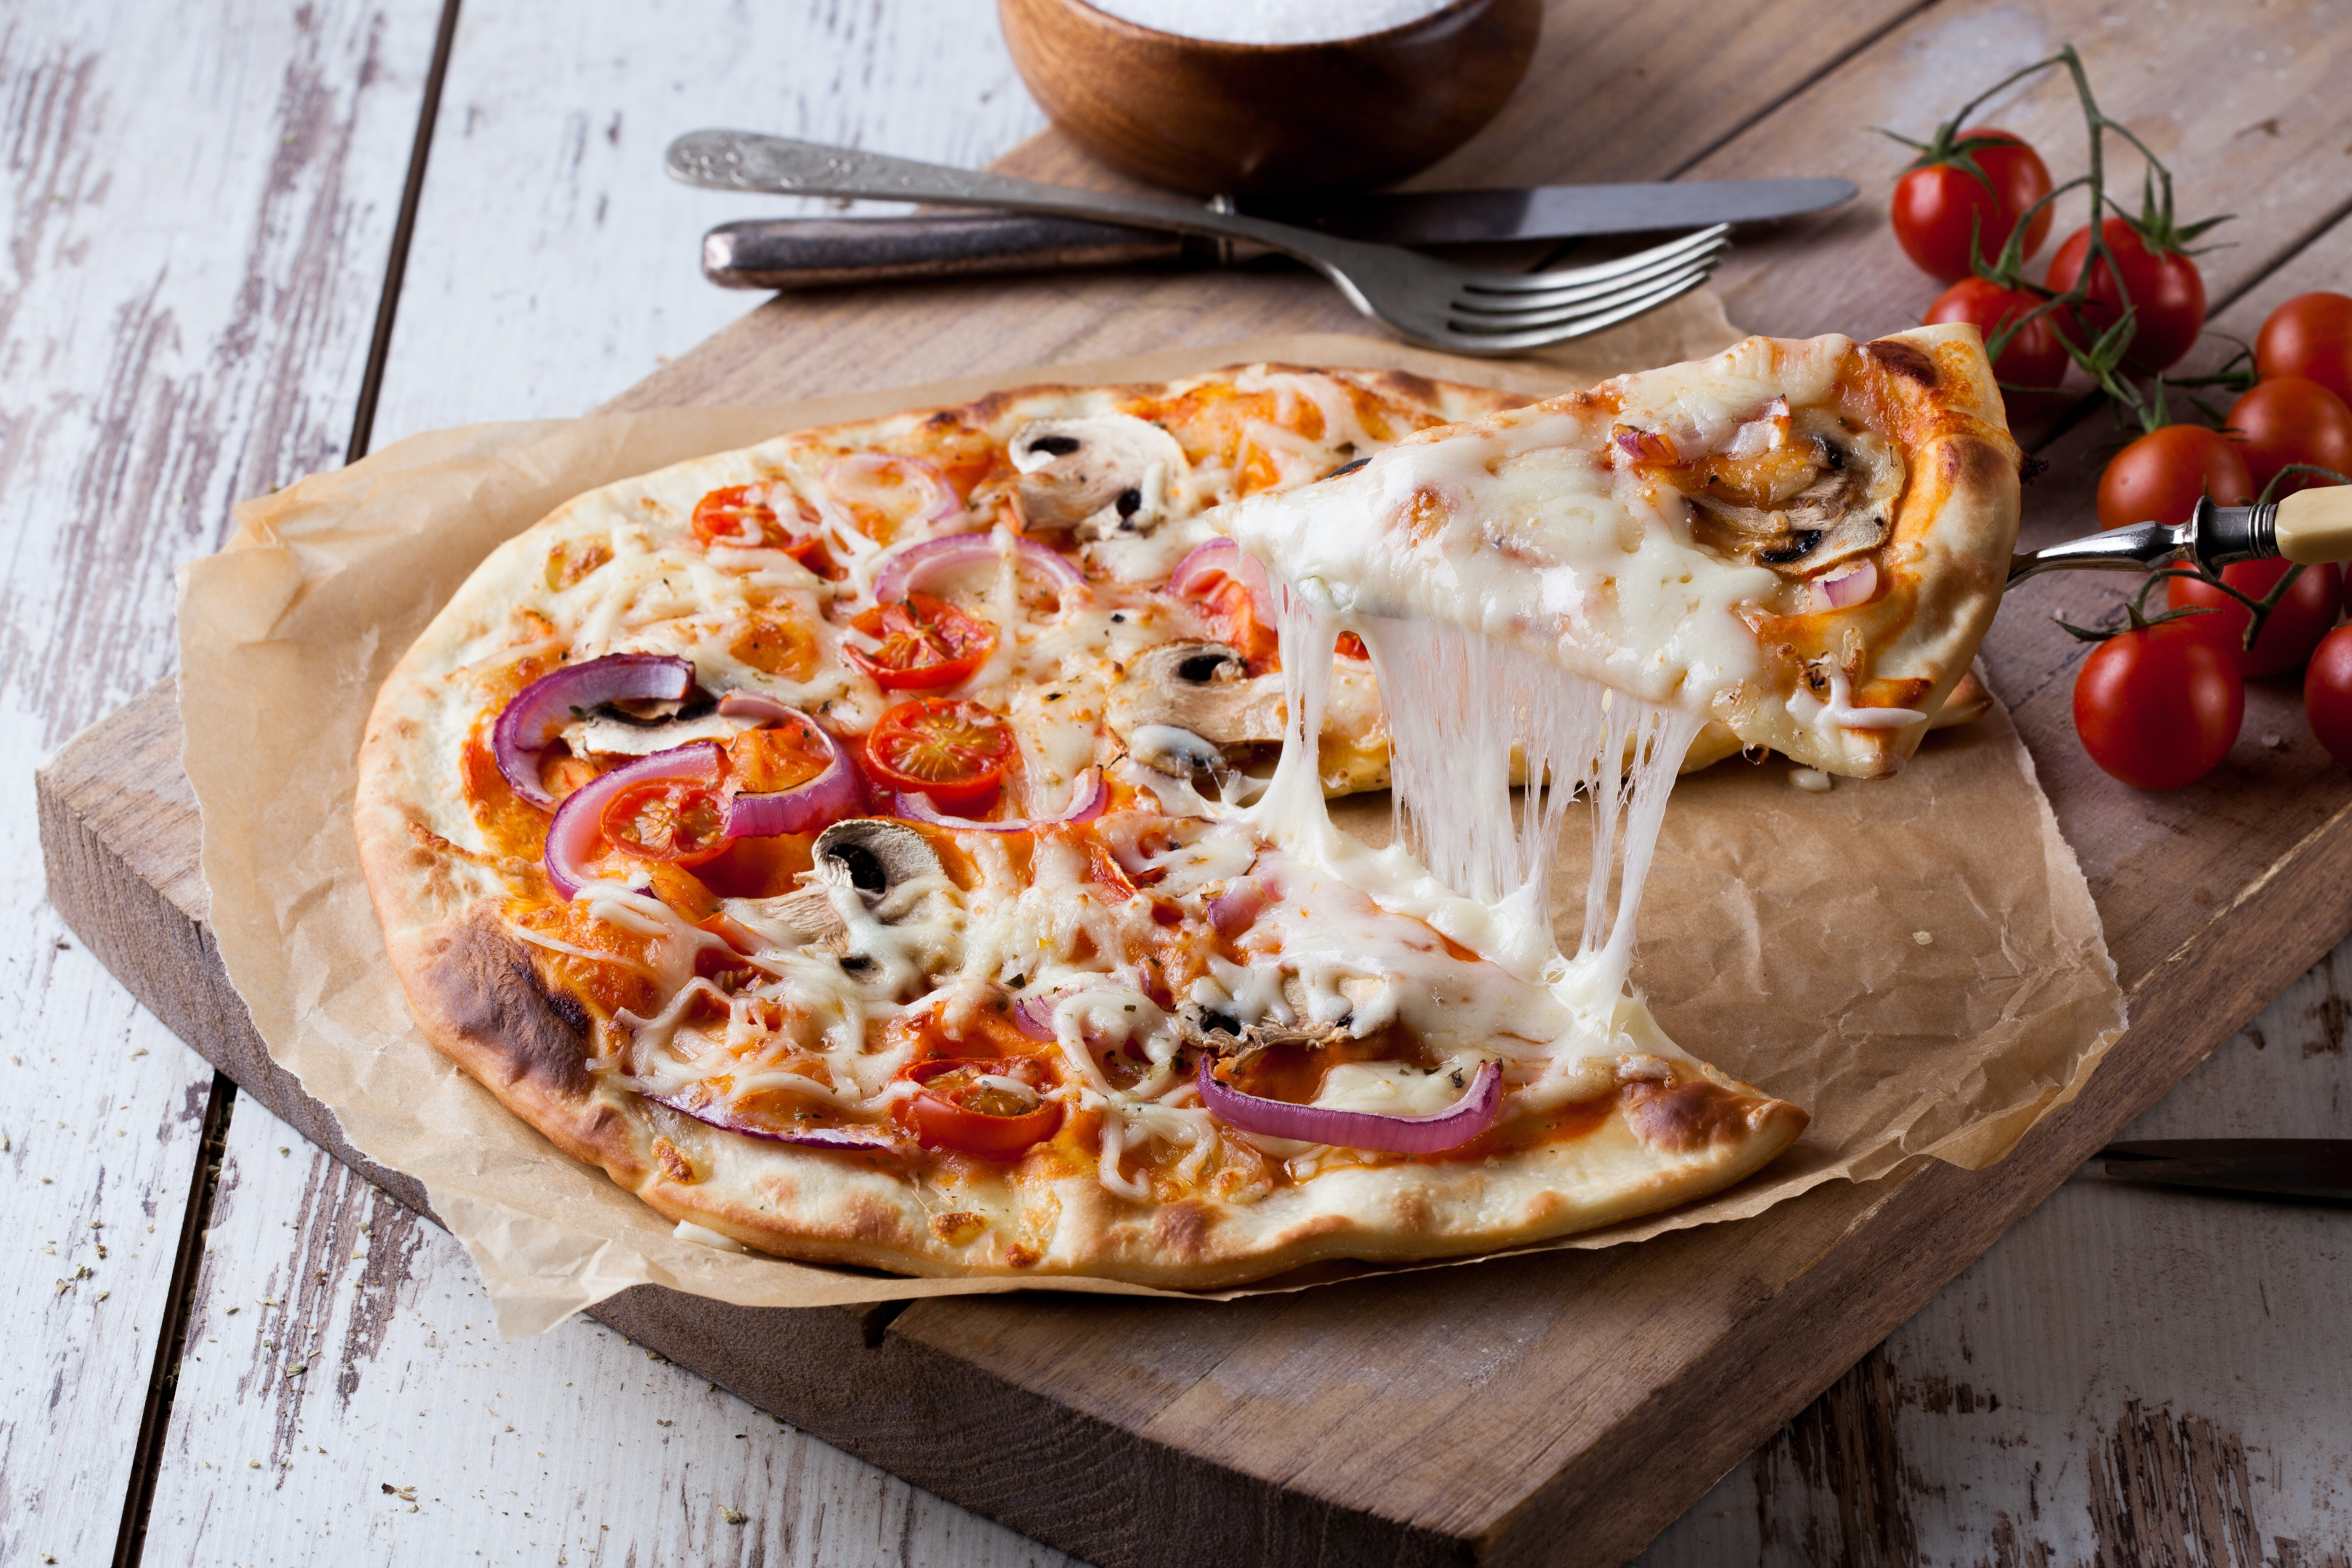 Is Gluten-Free Pizza Crust Healthier for Those With Diabetes?